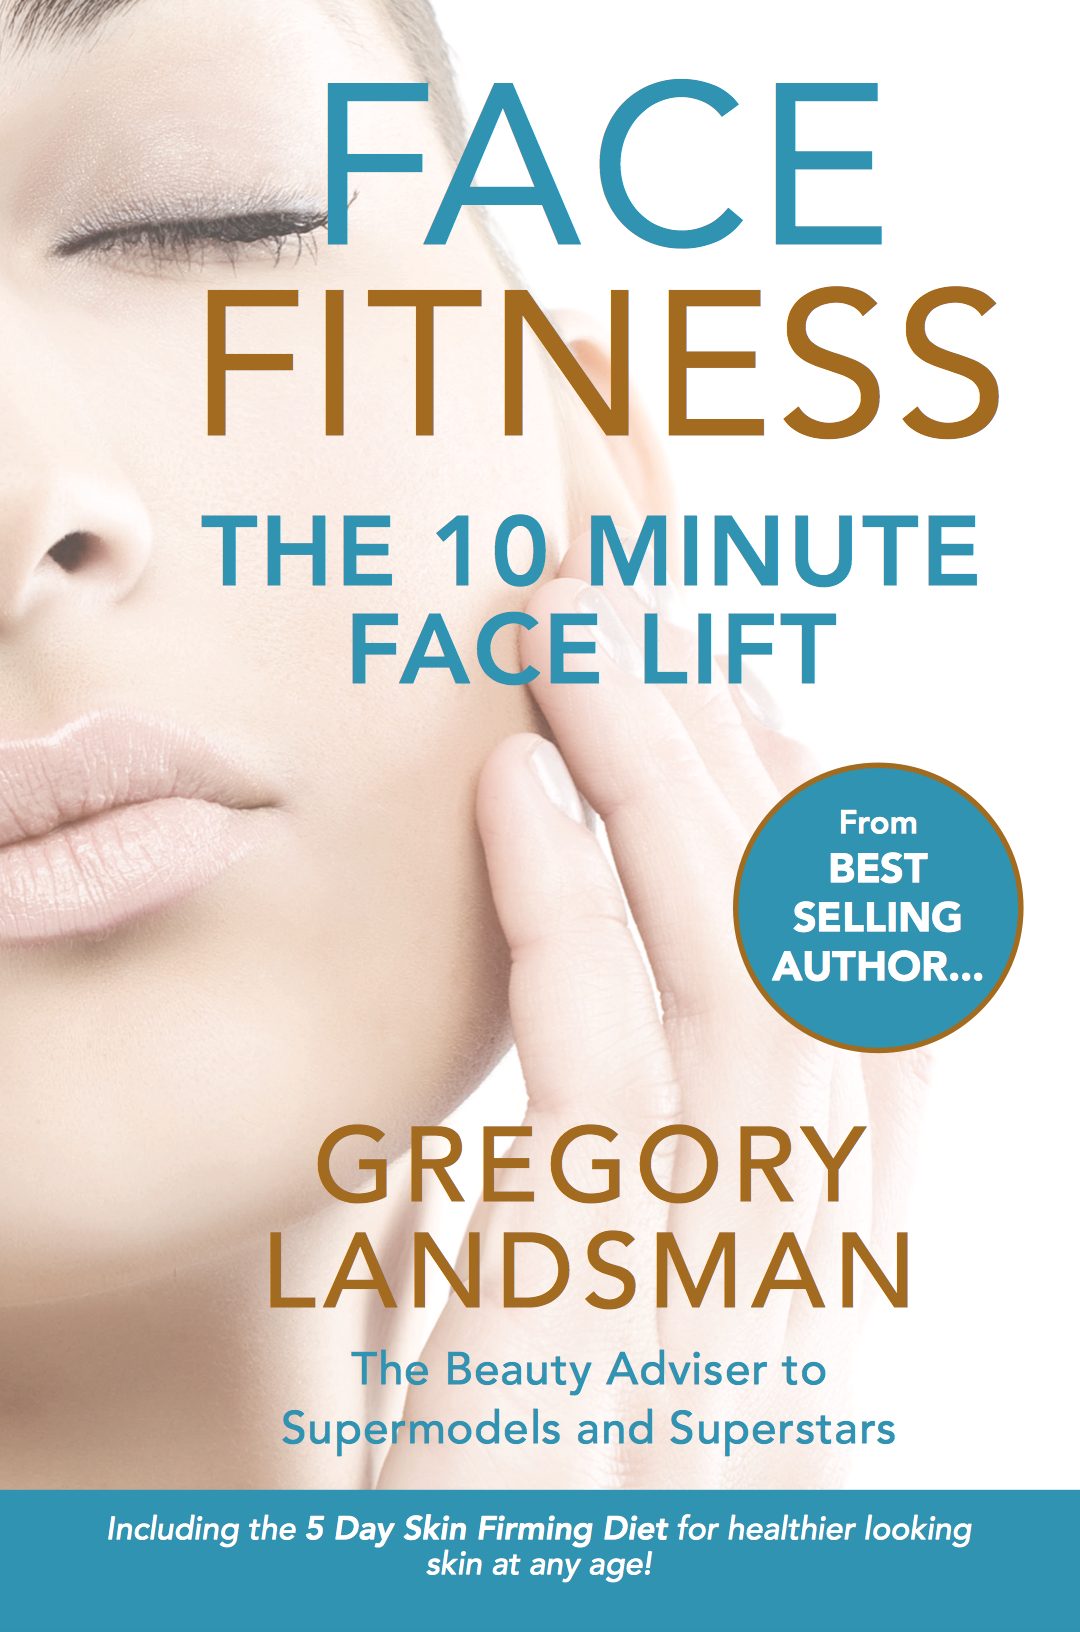 FACE FITNESS by Gregory Landsman